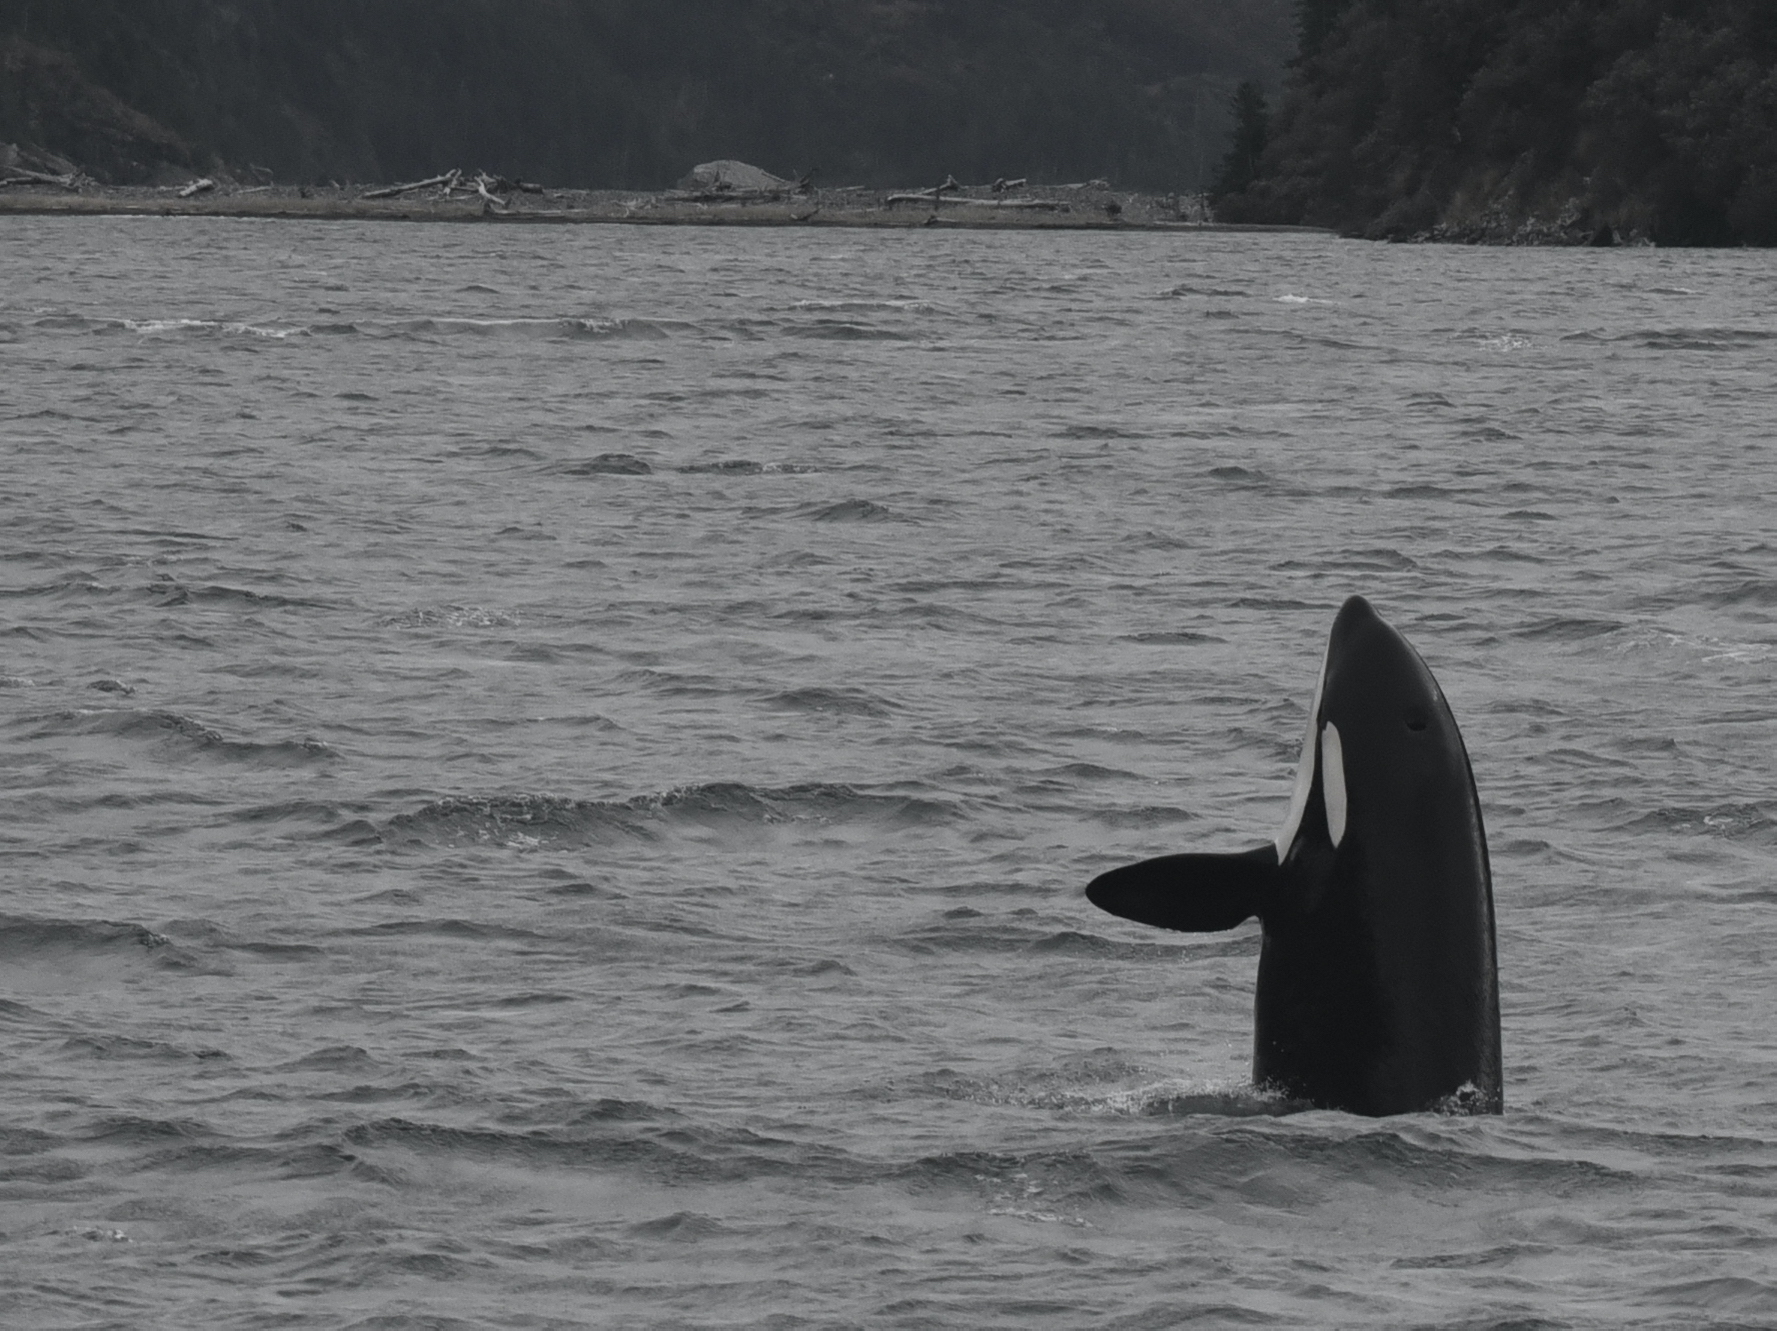 A killer whale rises vertically from a gray, wavy ocean. A gravel beach strewn with driftwood and a steep wooded shoreline form the background about a quarter-mile away.